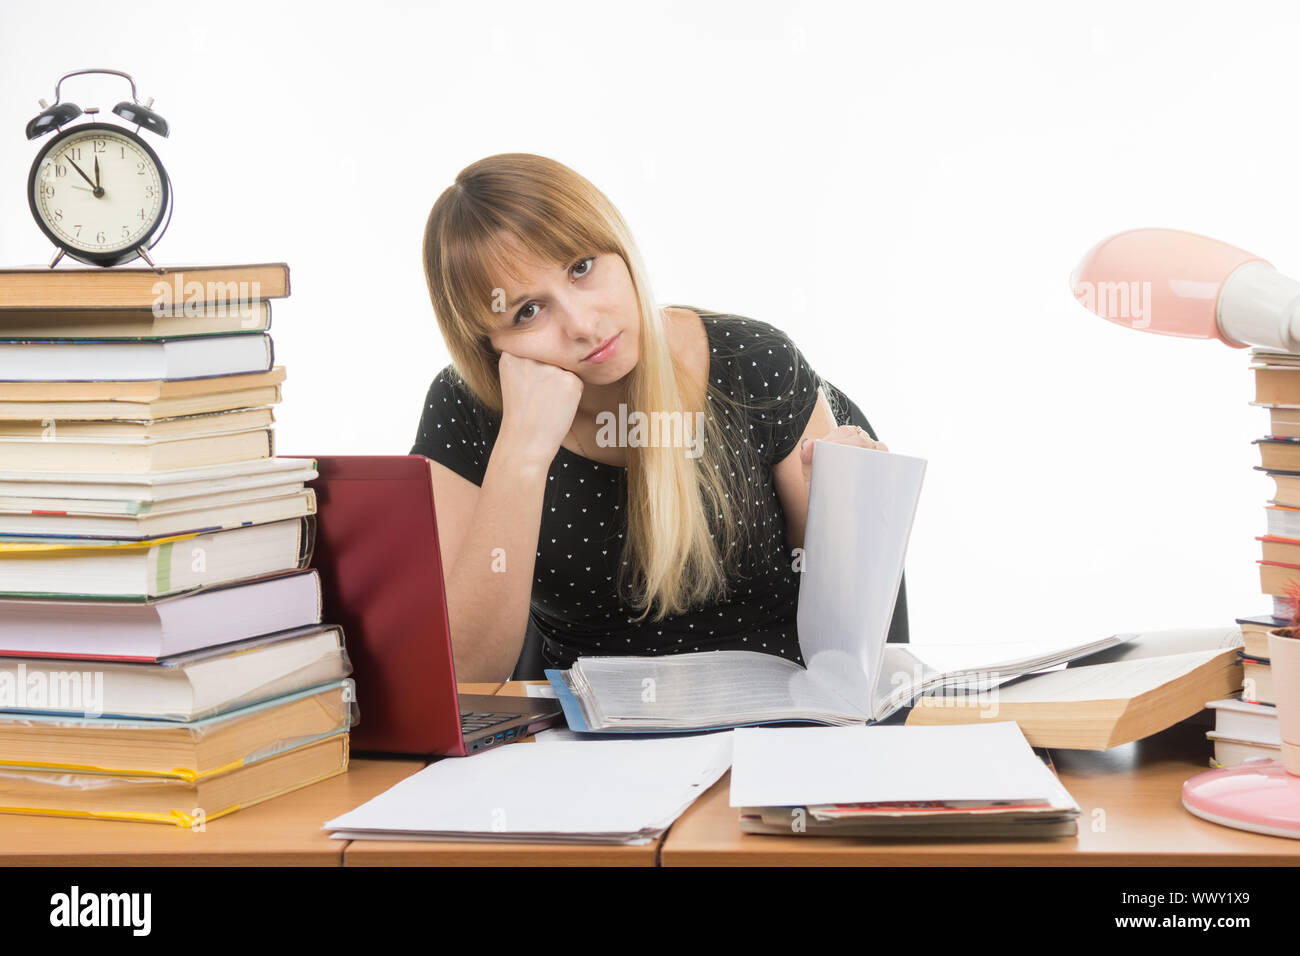 Student paper dull leafs at a table among books and stacks of looks in the picture Stock Photo